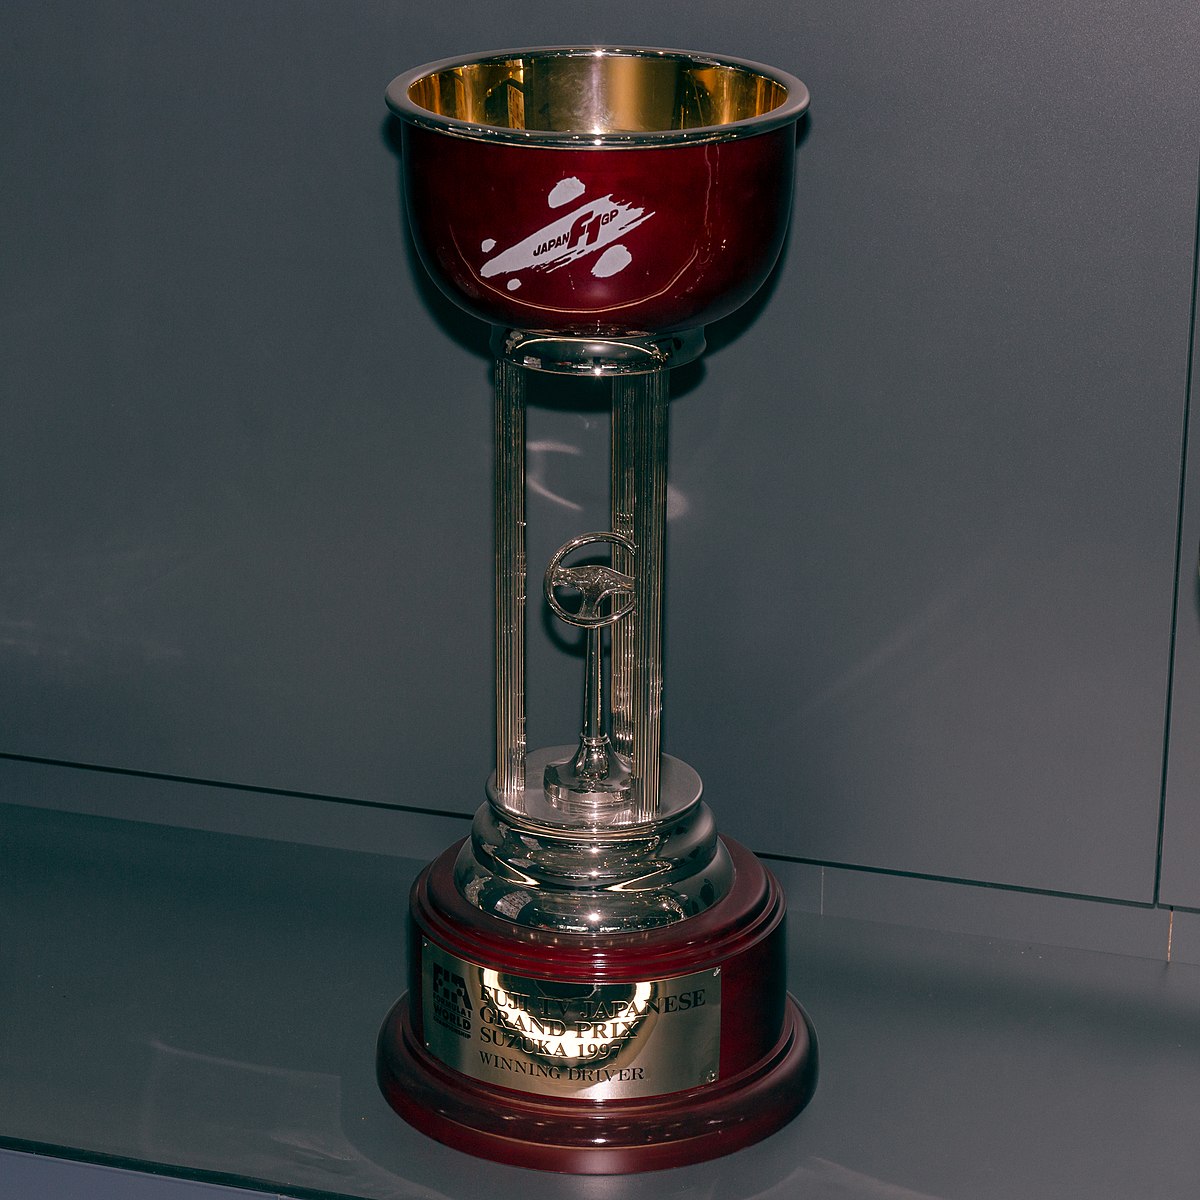 Japanese GP 2023 Winner: What unique trophy will this year's winner  receive?